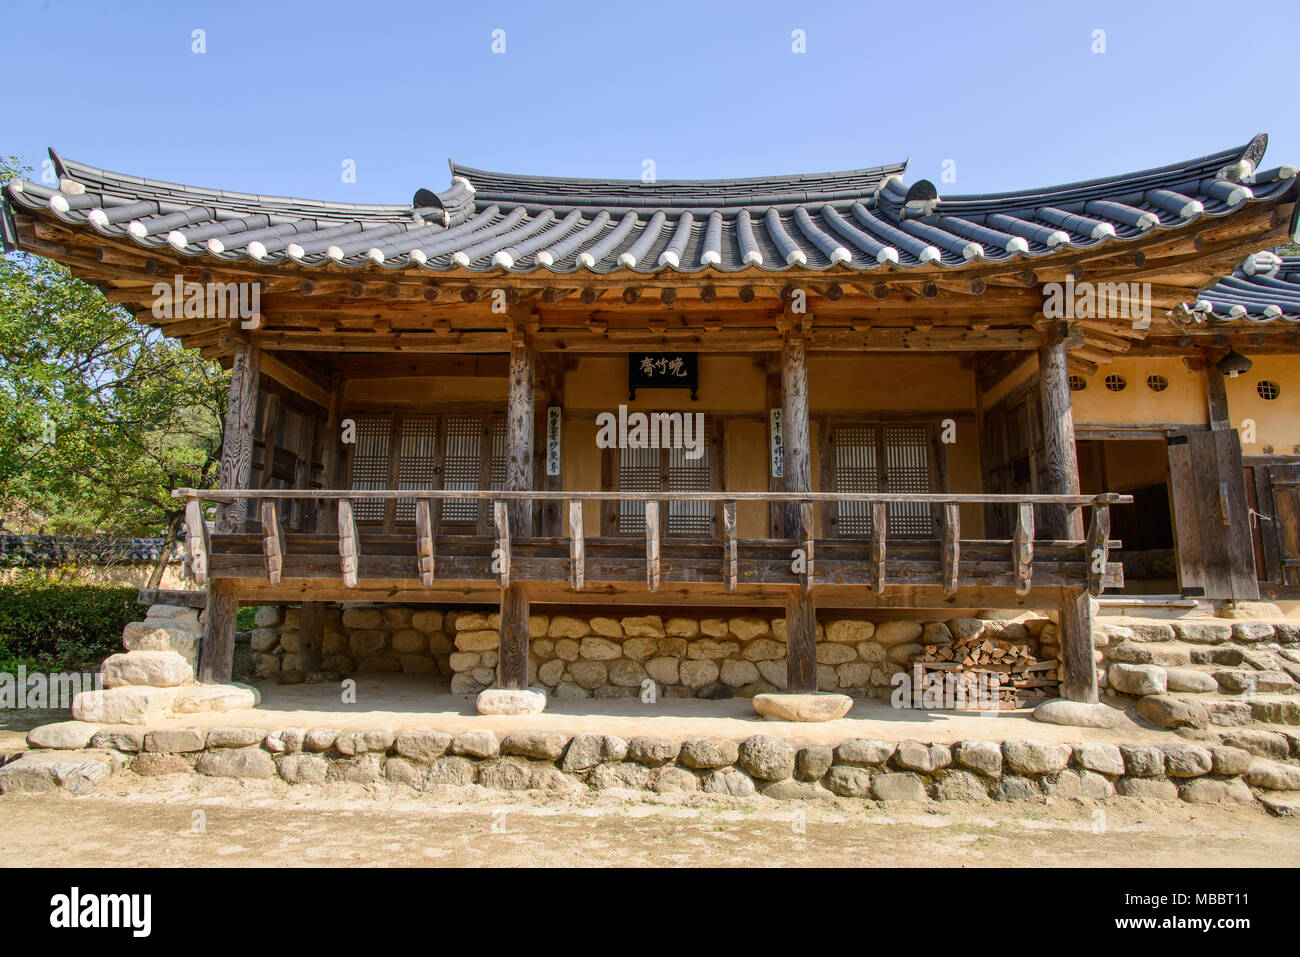 YEONGJU, KOREA - OCTOBER 15, 2014: Whole view of the old house 'Manjukjae' in Seonbichon traditional village. Stock Photo